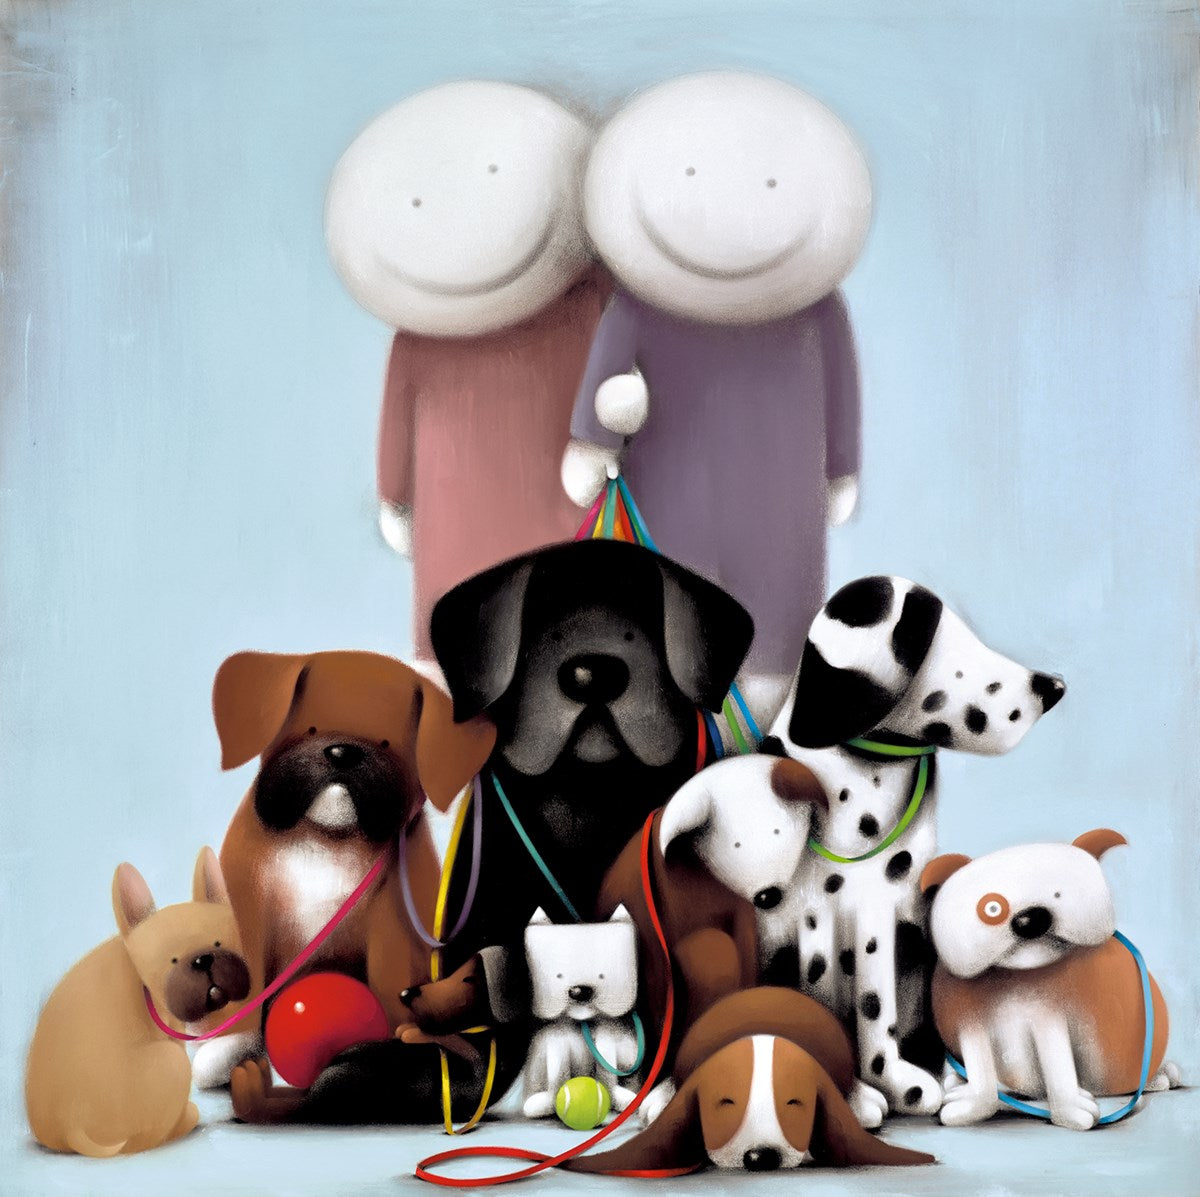 Love Comes in All Shapes and Sizes limited edition framed print by Doug Hyde